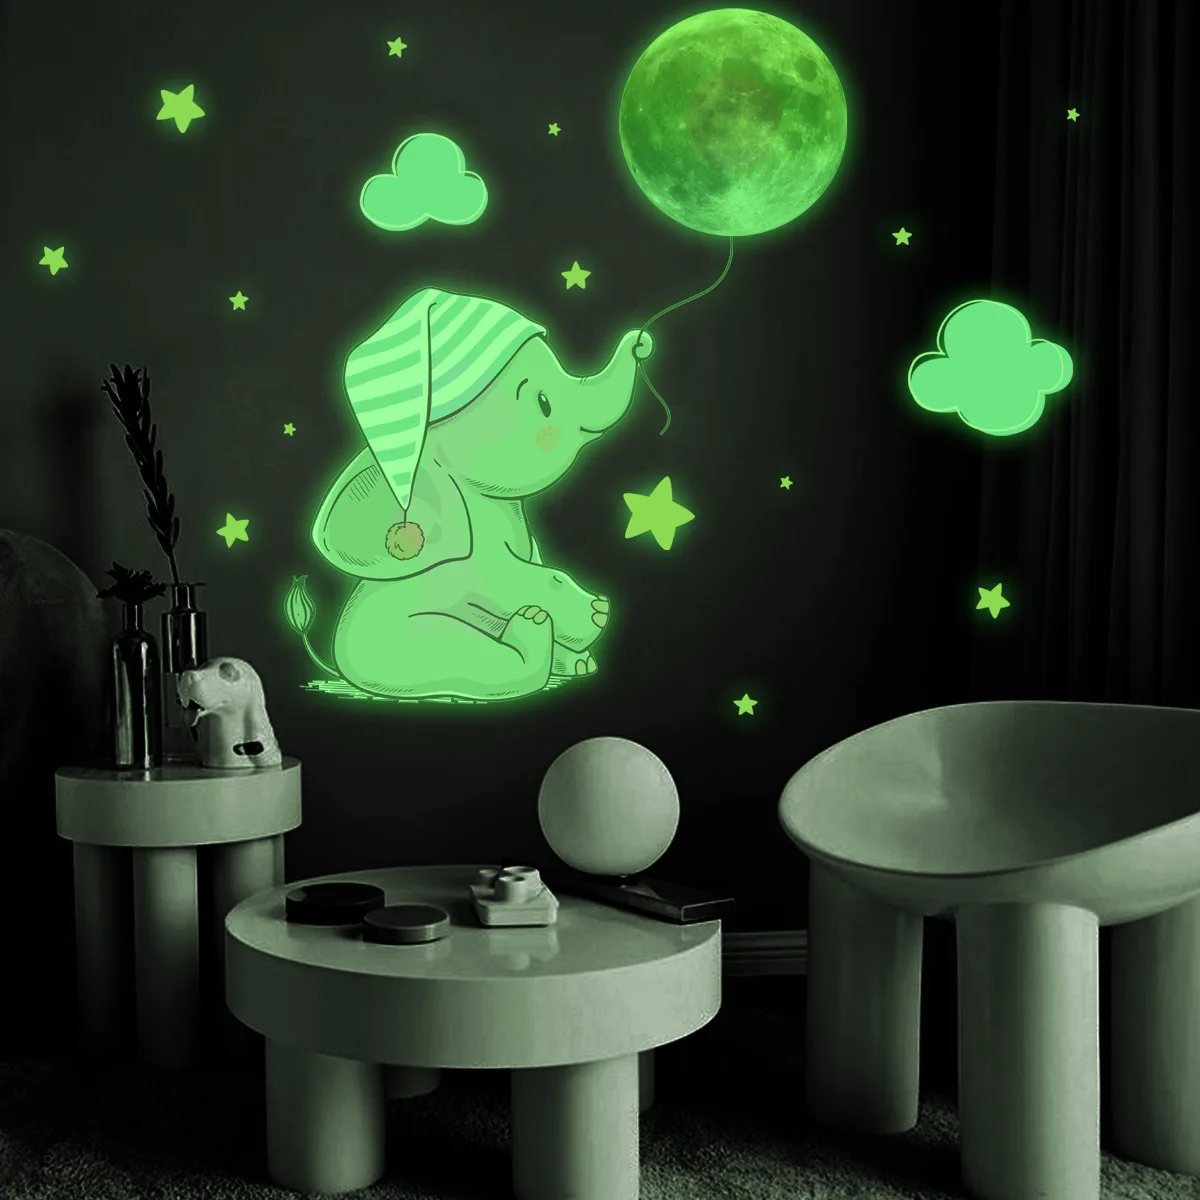 Luminous Moon Elephant Wall Stickers Cartoon Fluorescent Decals Glow In The Dark Stickers For Kids Room Nursery Home Decoration